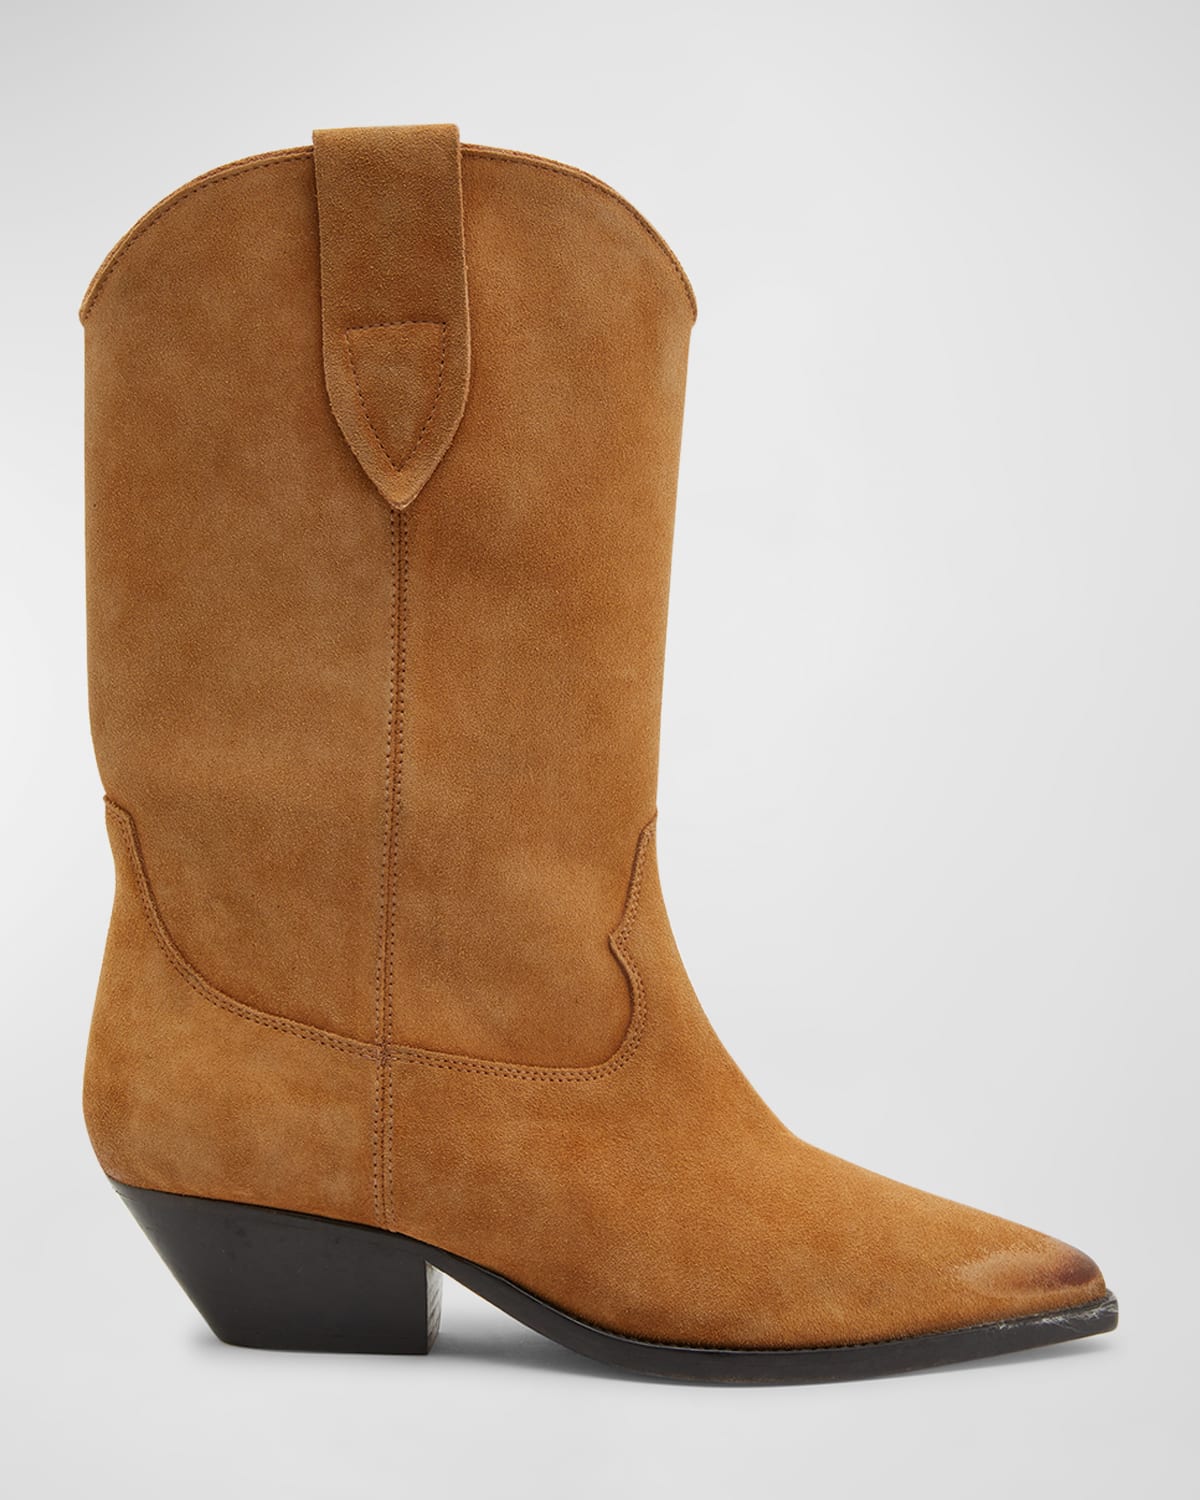 ISABEL MARANT DUERTO SUEDE WESTERN BOOTS